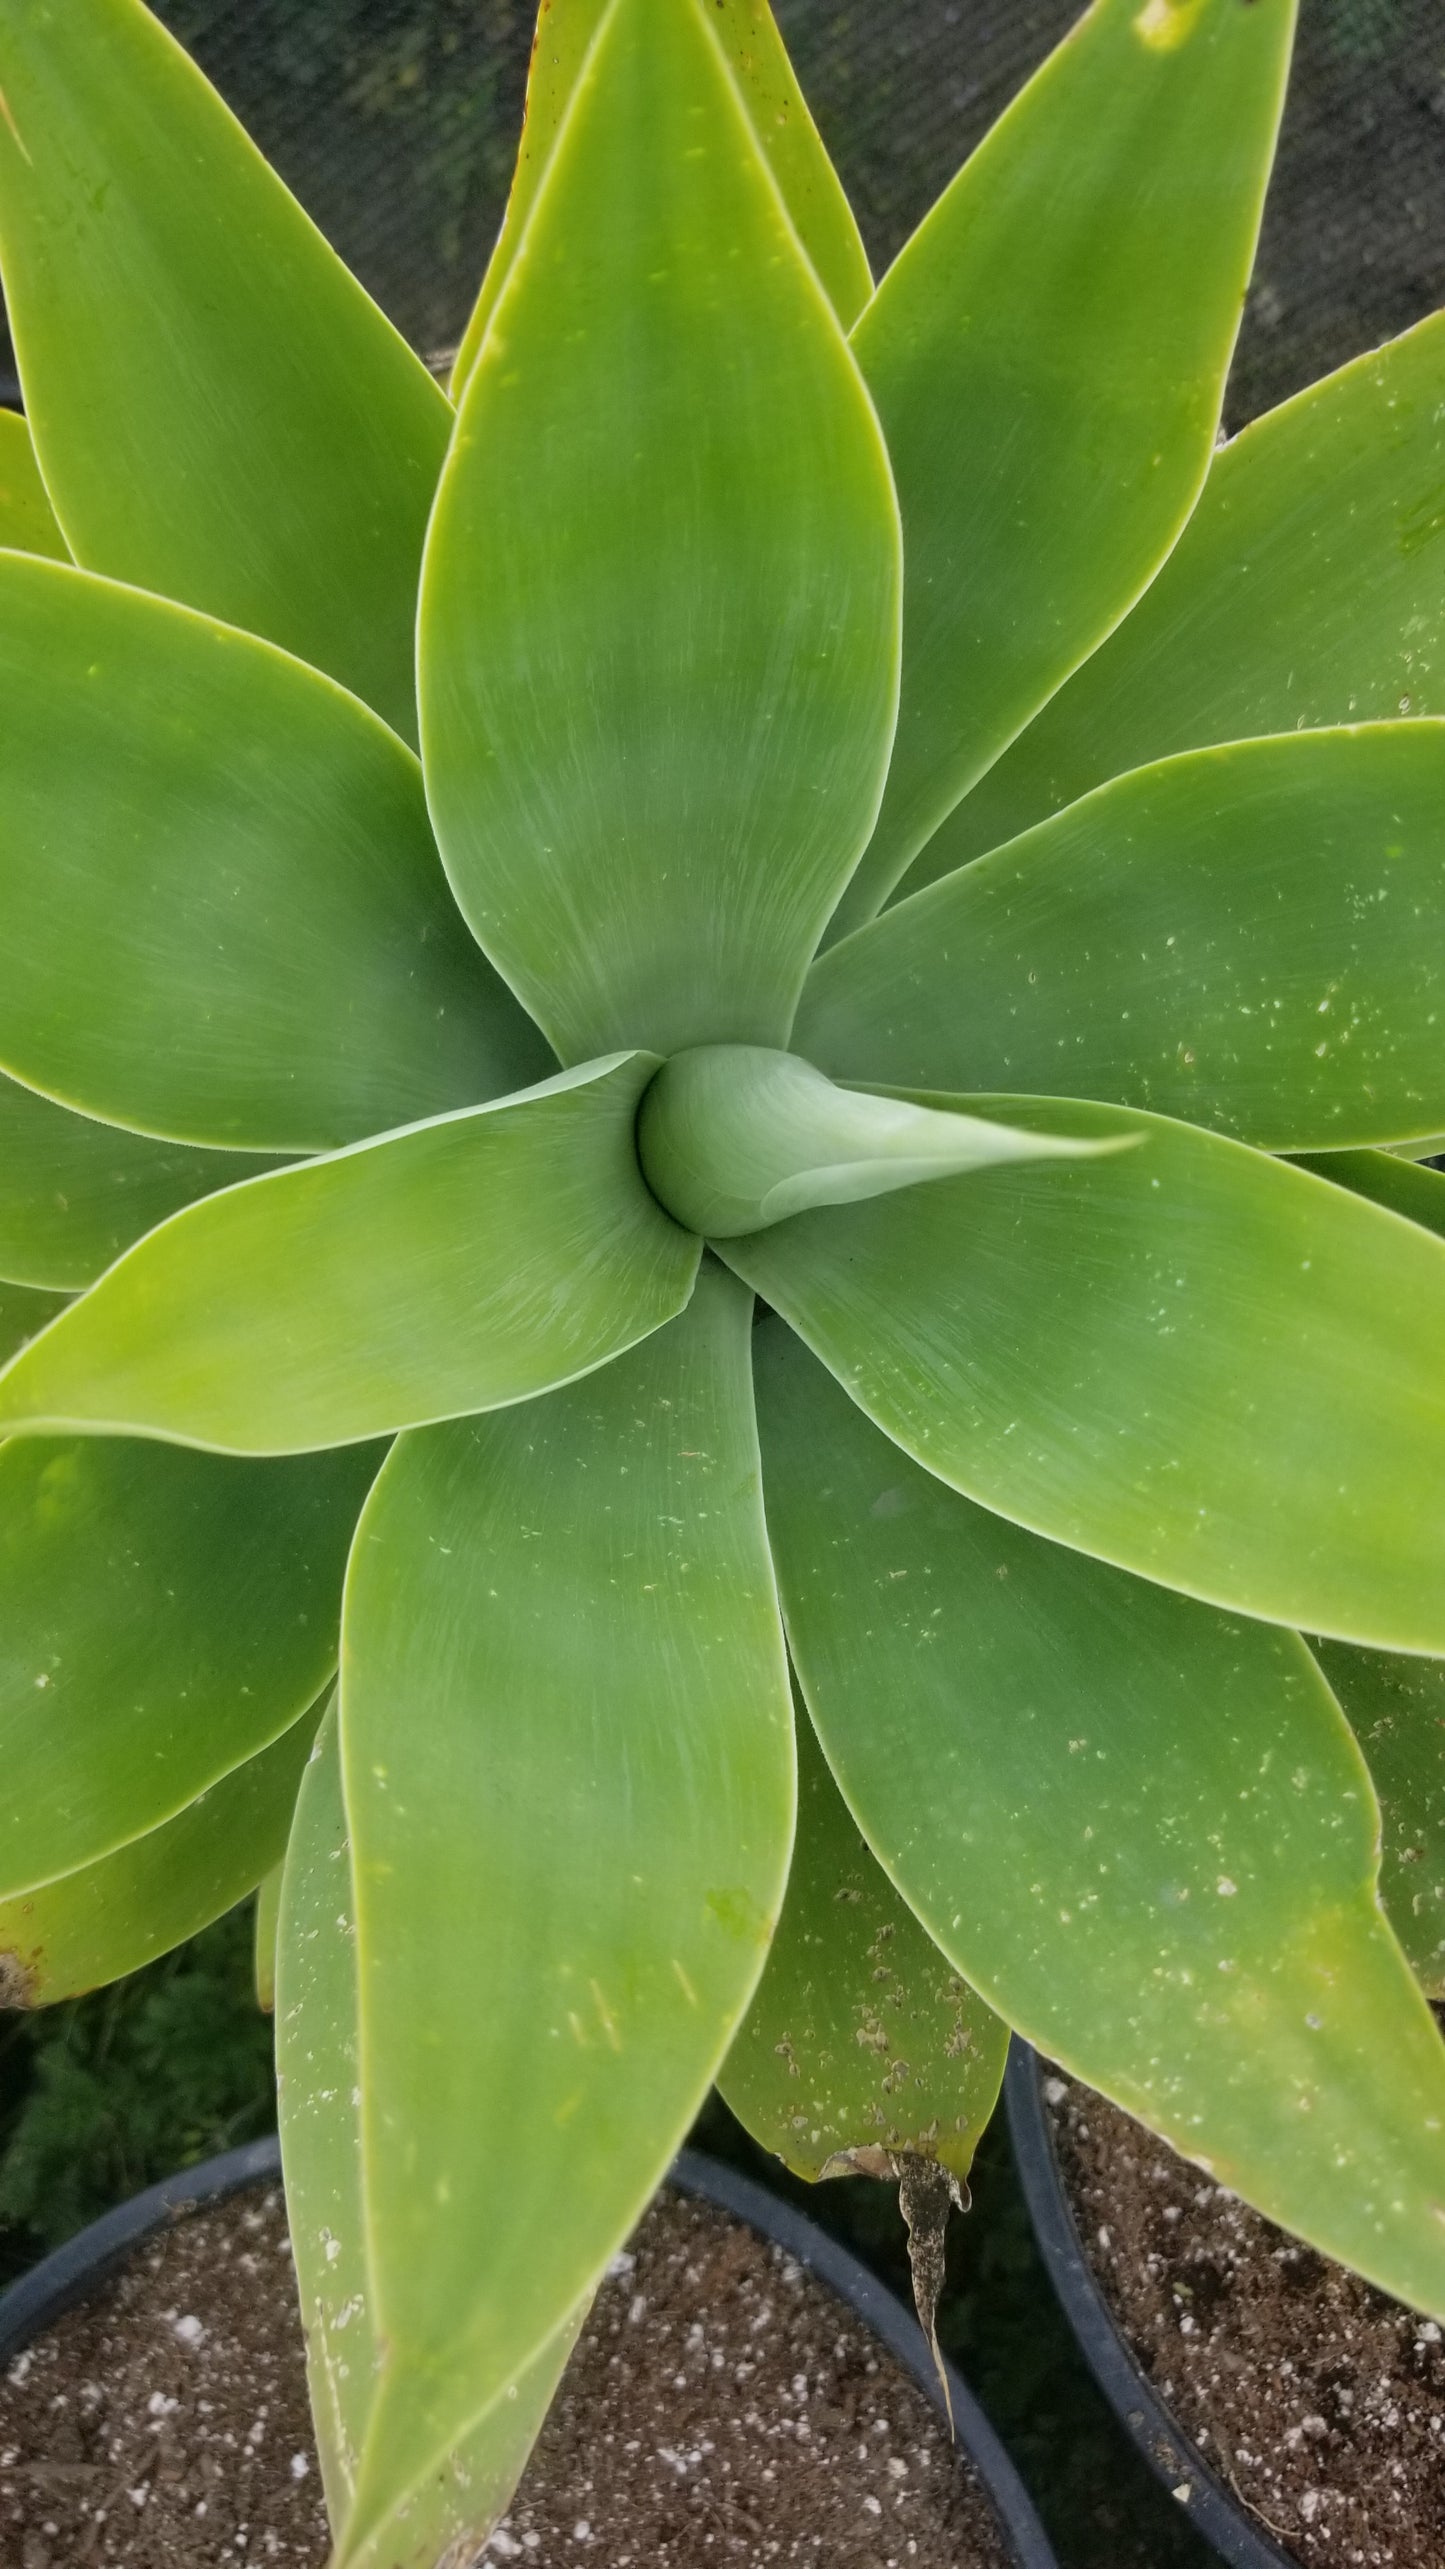 Agave Attenuata or Agave Fox Tail